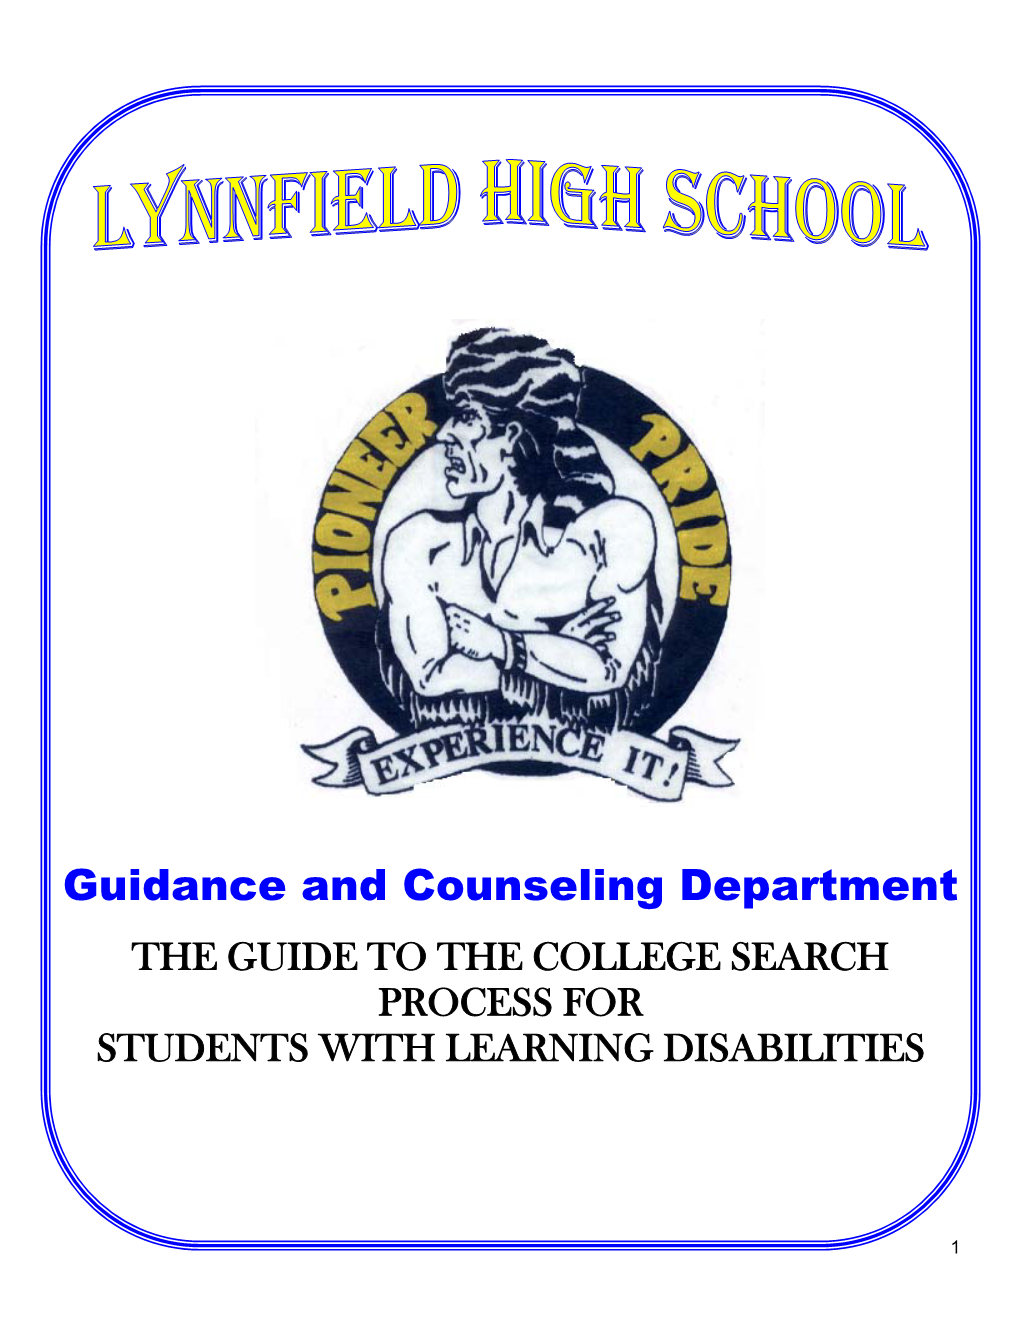 The Guide to the College Search Process for Students with Learning Disabilities